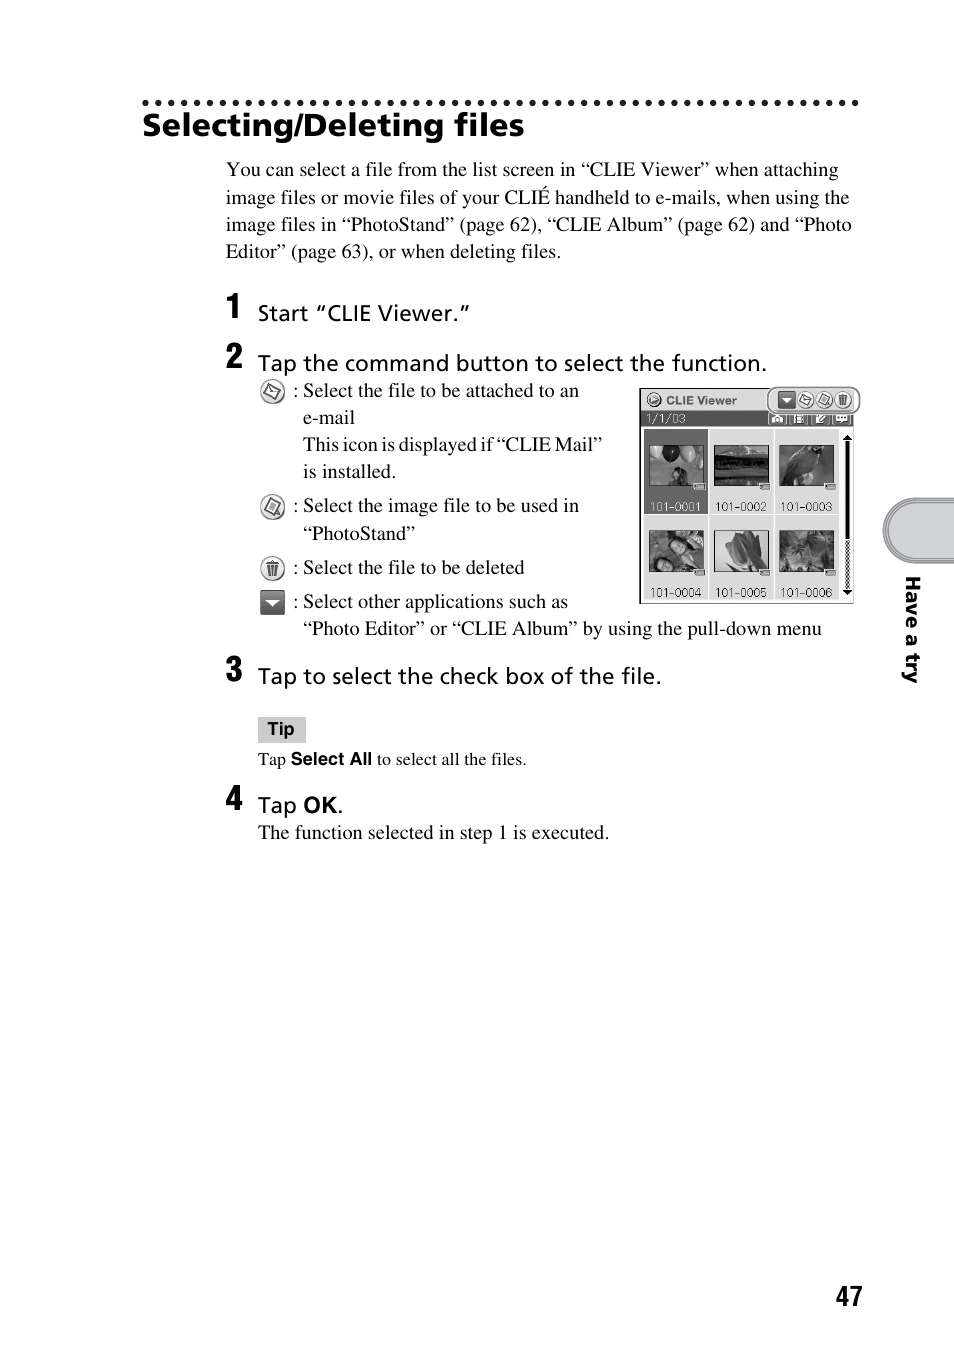 Selecting/deleting files | Sony PEG-TG50 User Manual | Page 47 / 100